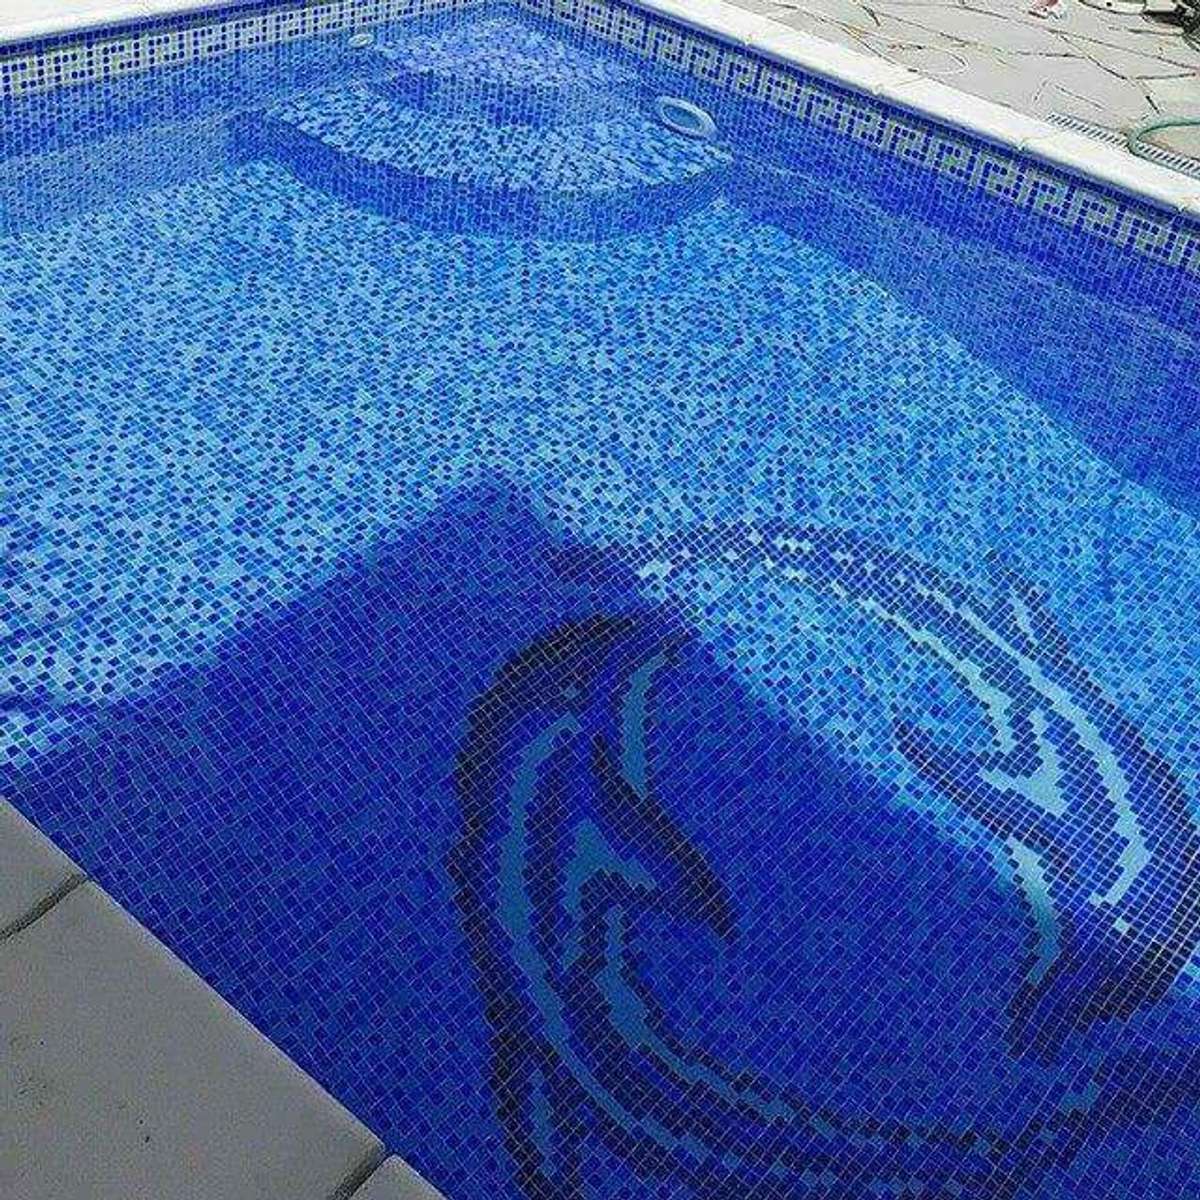 Designs by Swimming Pool Work wave fountains, Delhi | Kolo